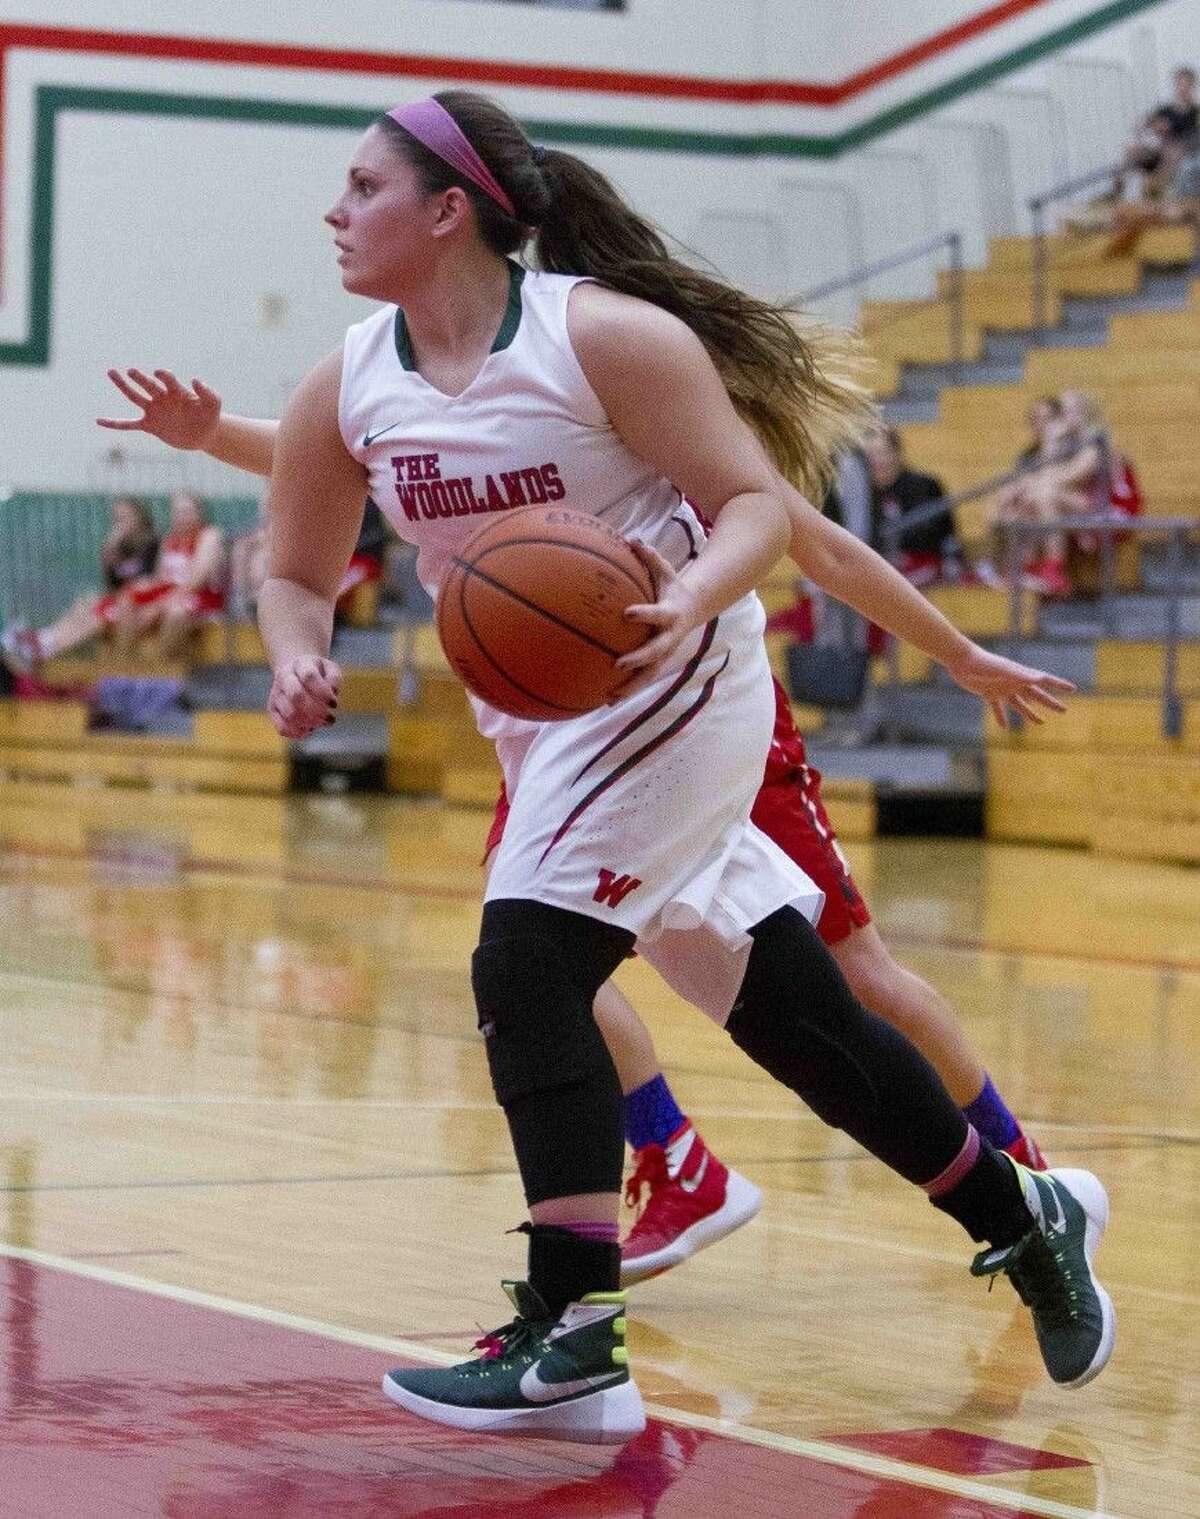 The Woodlands guard Julia Glandt looks to pass Tuesday in The Woodlands.